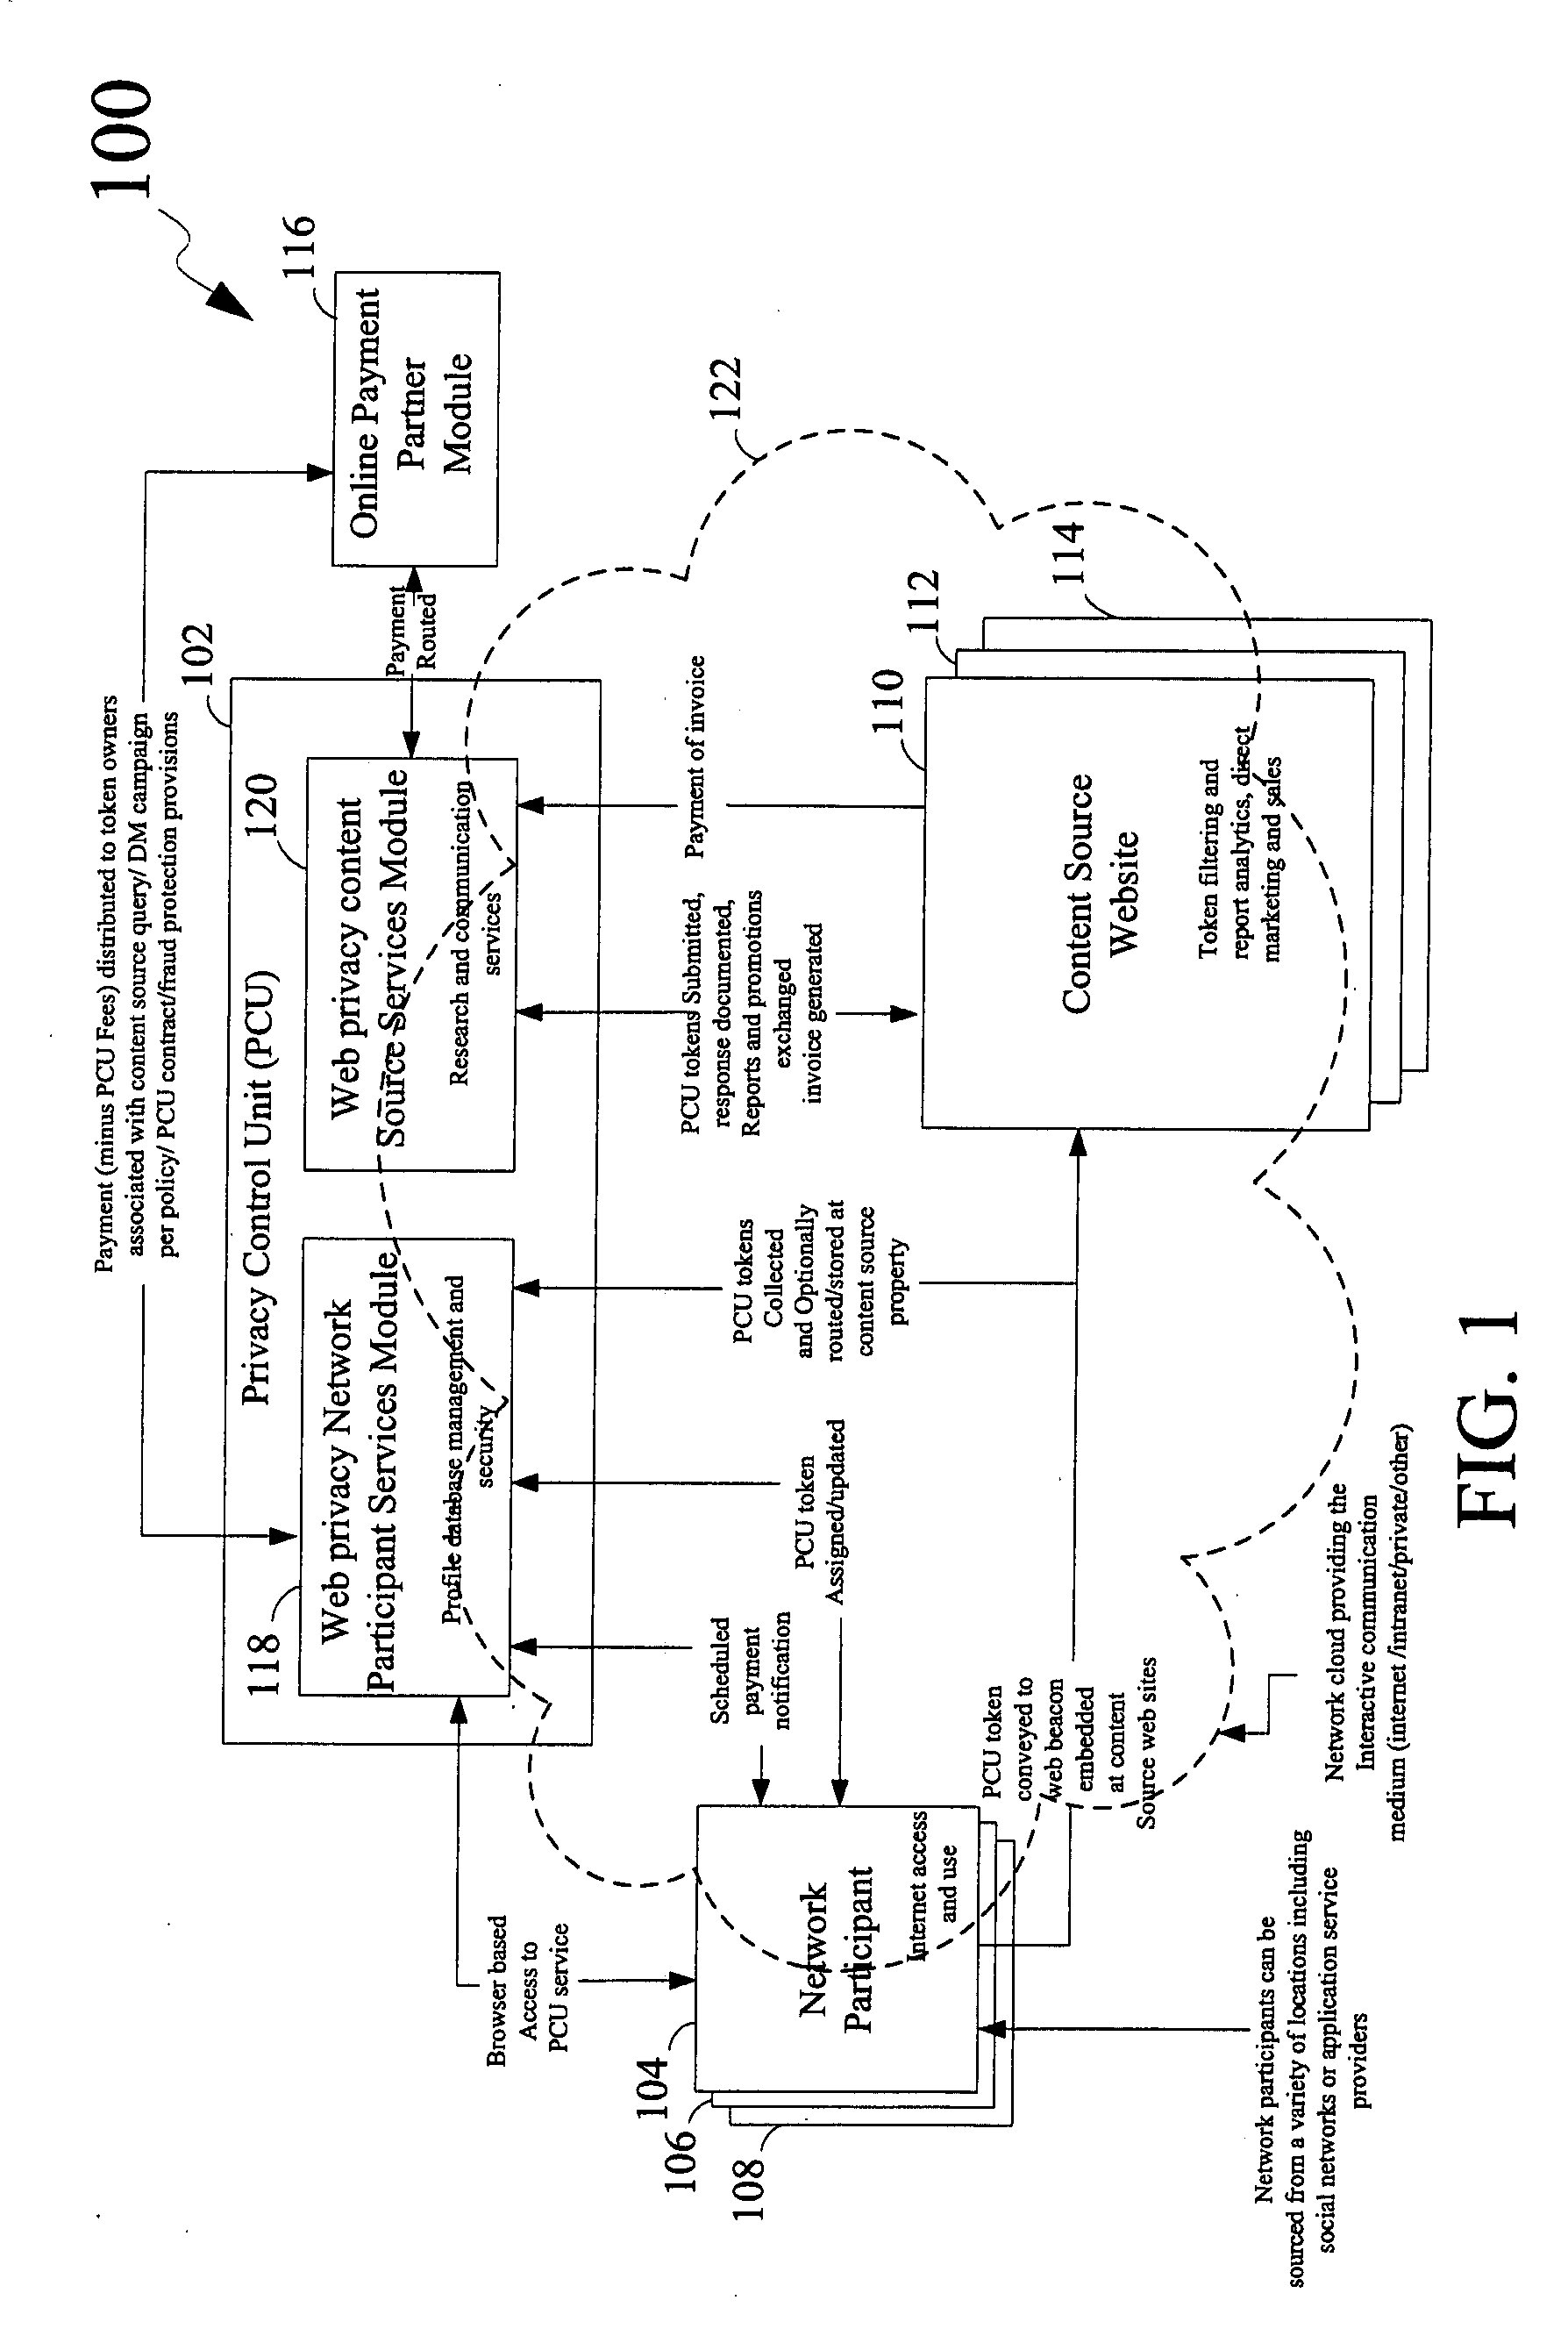 System for Enabling Secure Private Exchange of Data and Communication Between Anonymous Network Participants and Third Parties and a Method Thereof